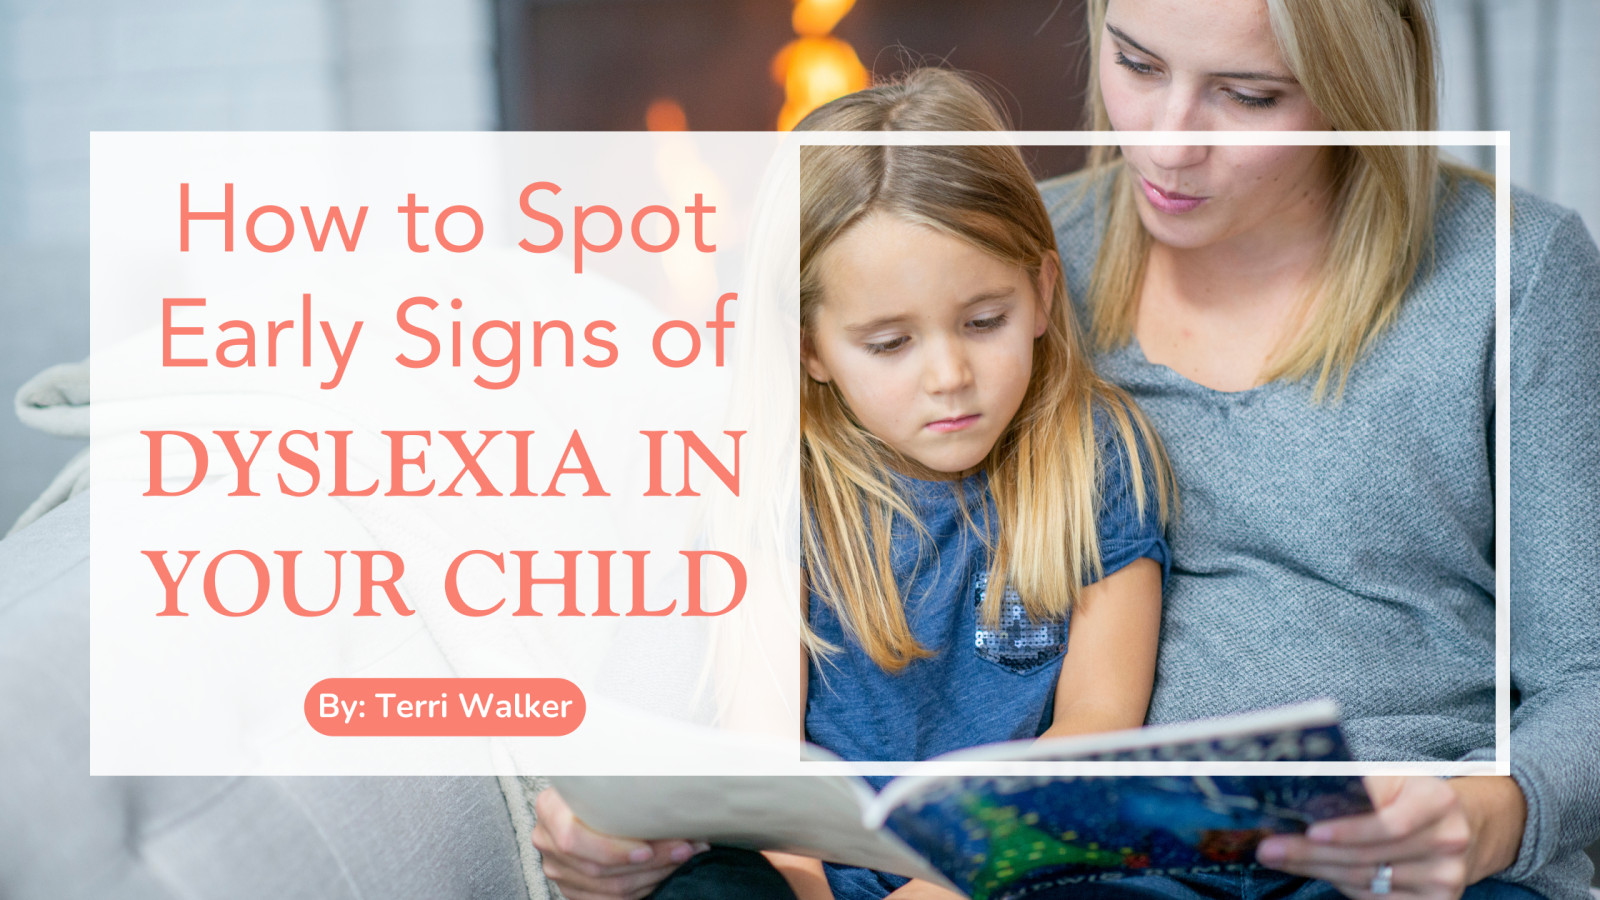 How to Spot Early Signs of Dyslexia in Your Child